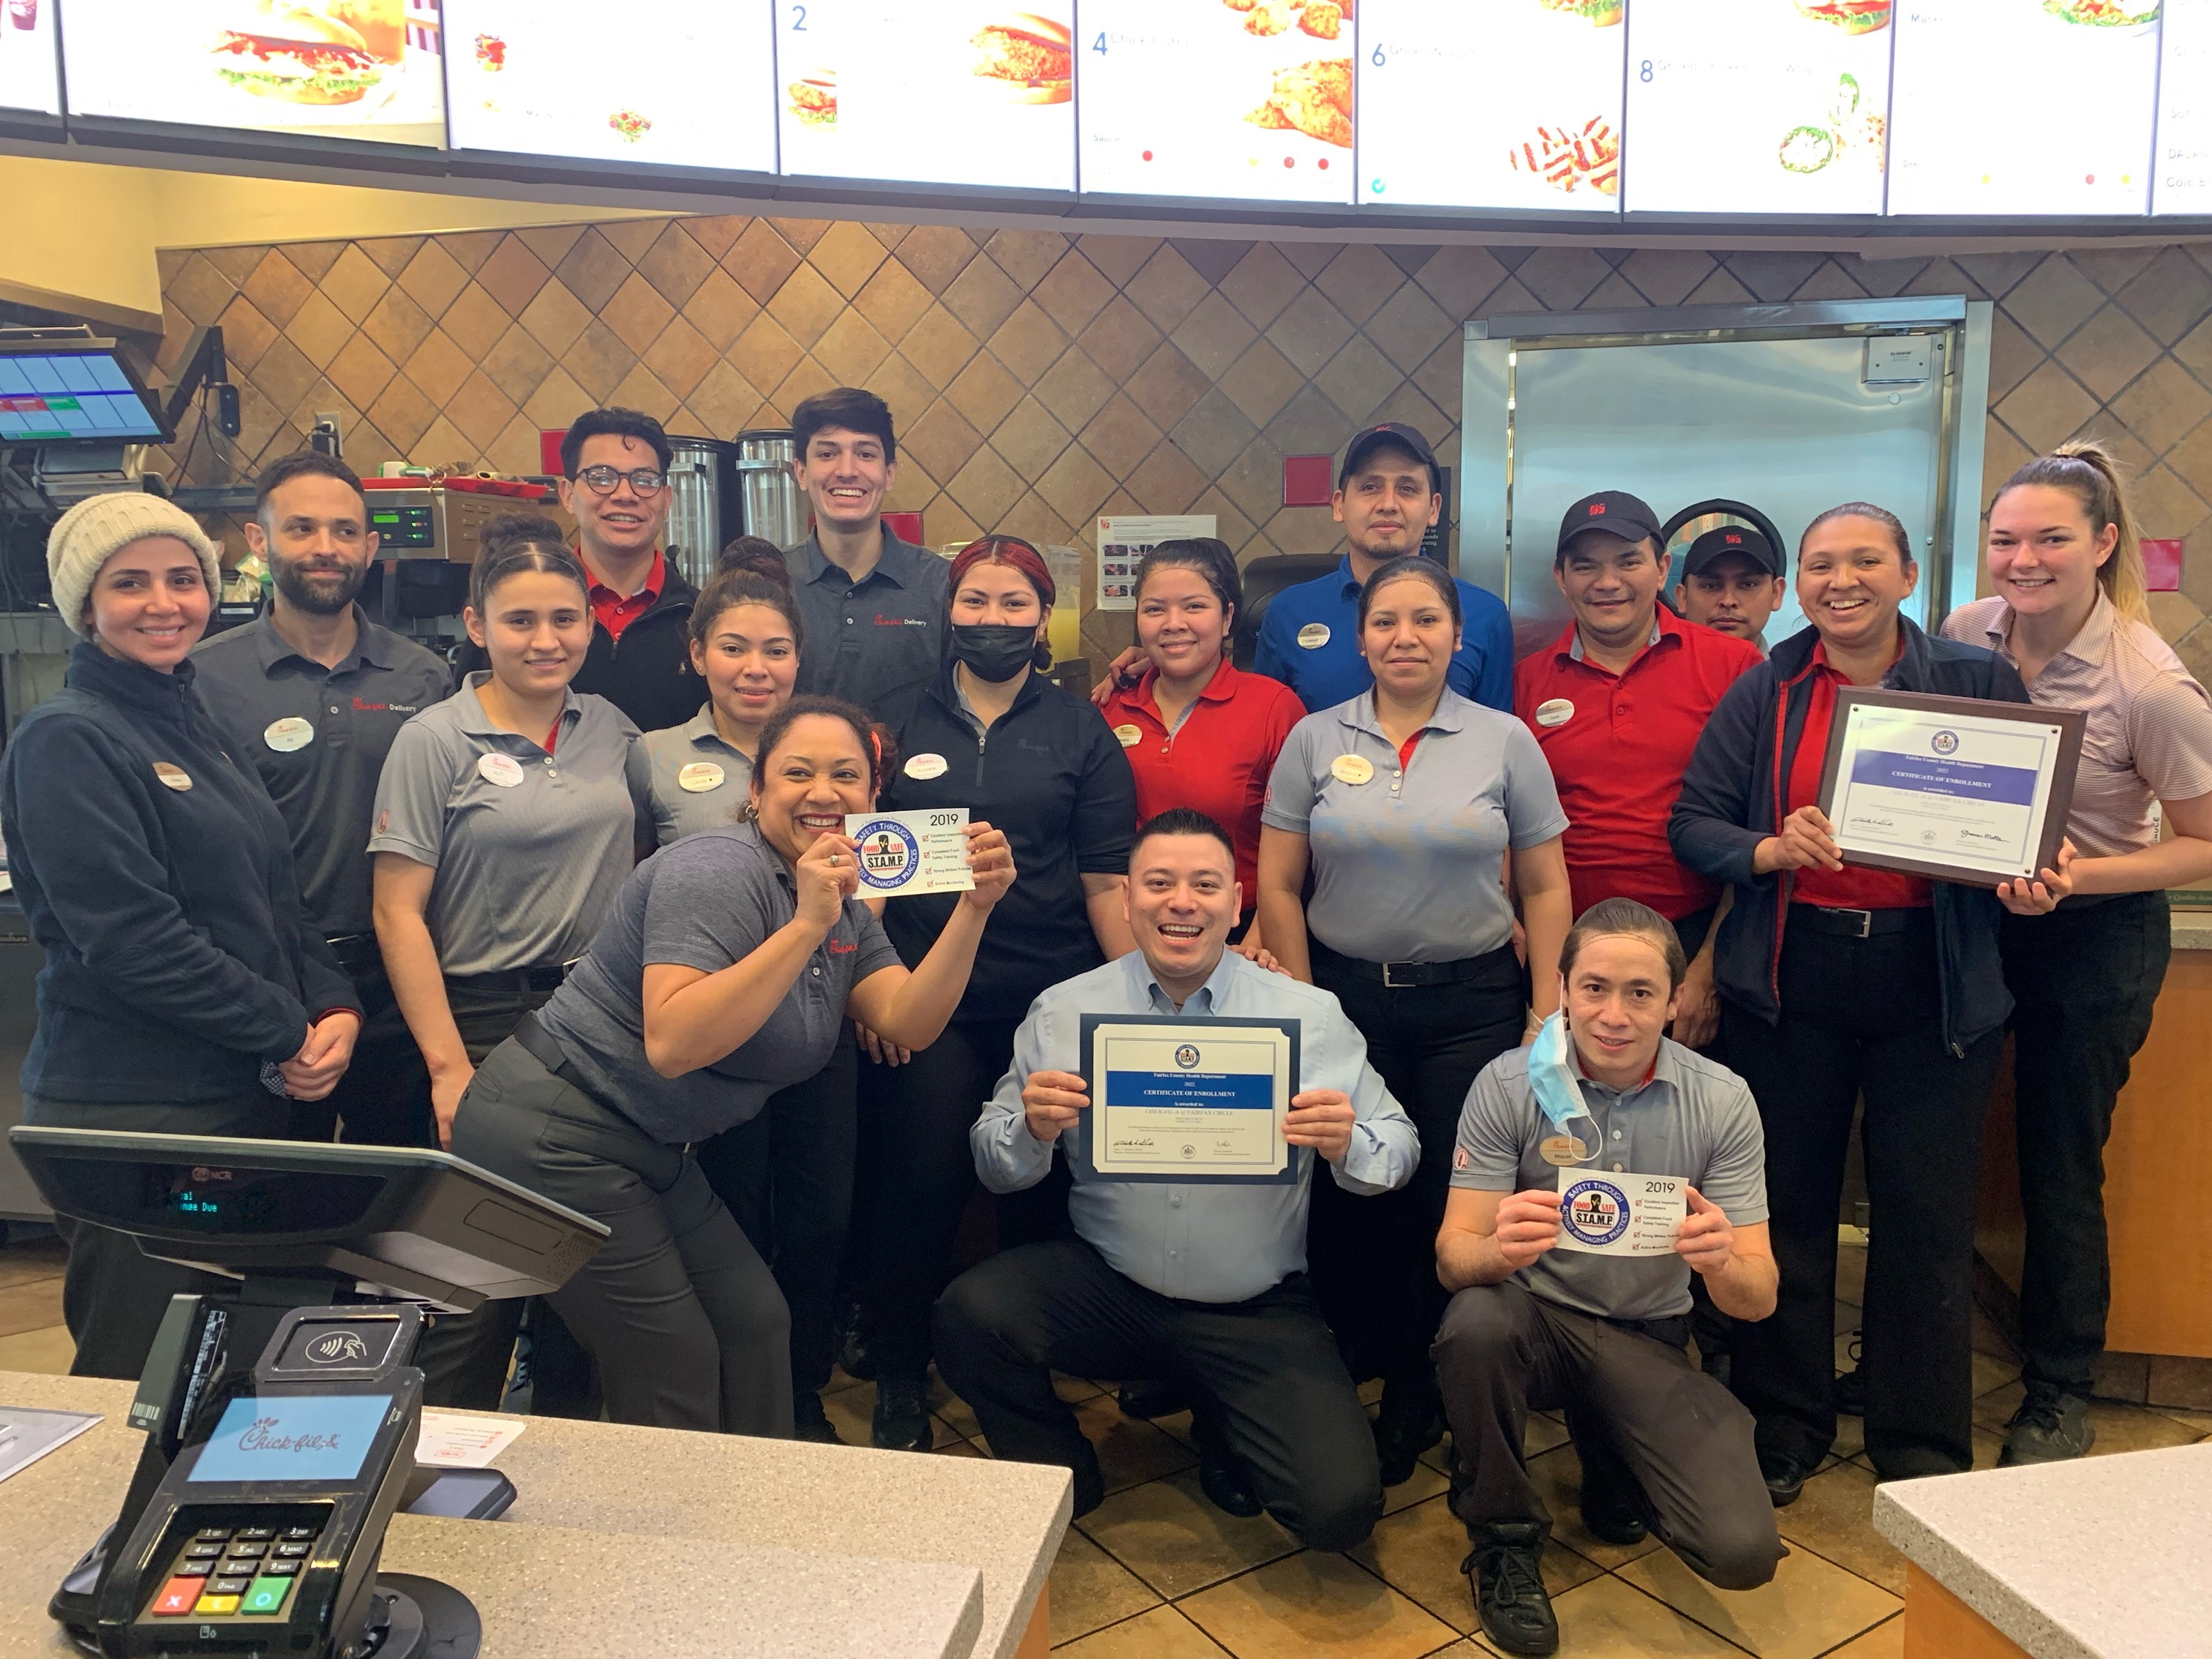 The CHICK-FIL-A at FAIRFAX CIRCLE team receiving STAMP recognition.